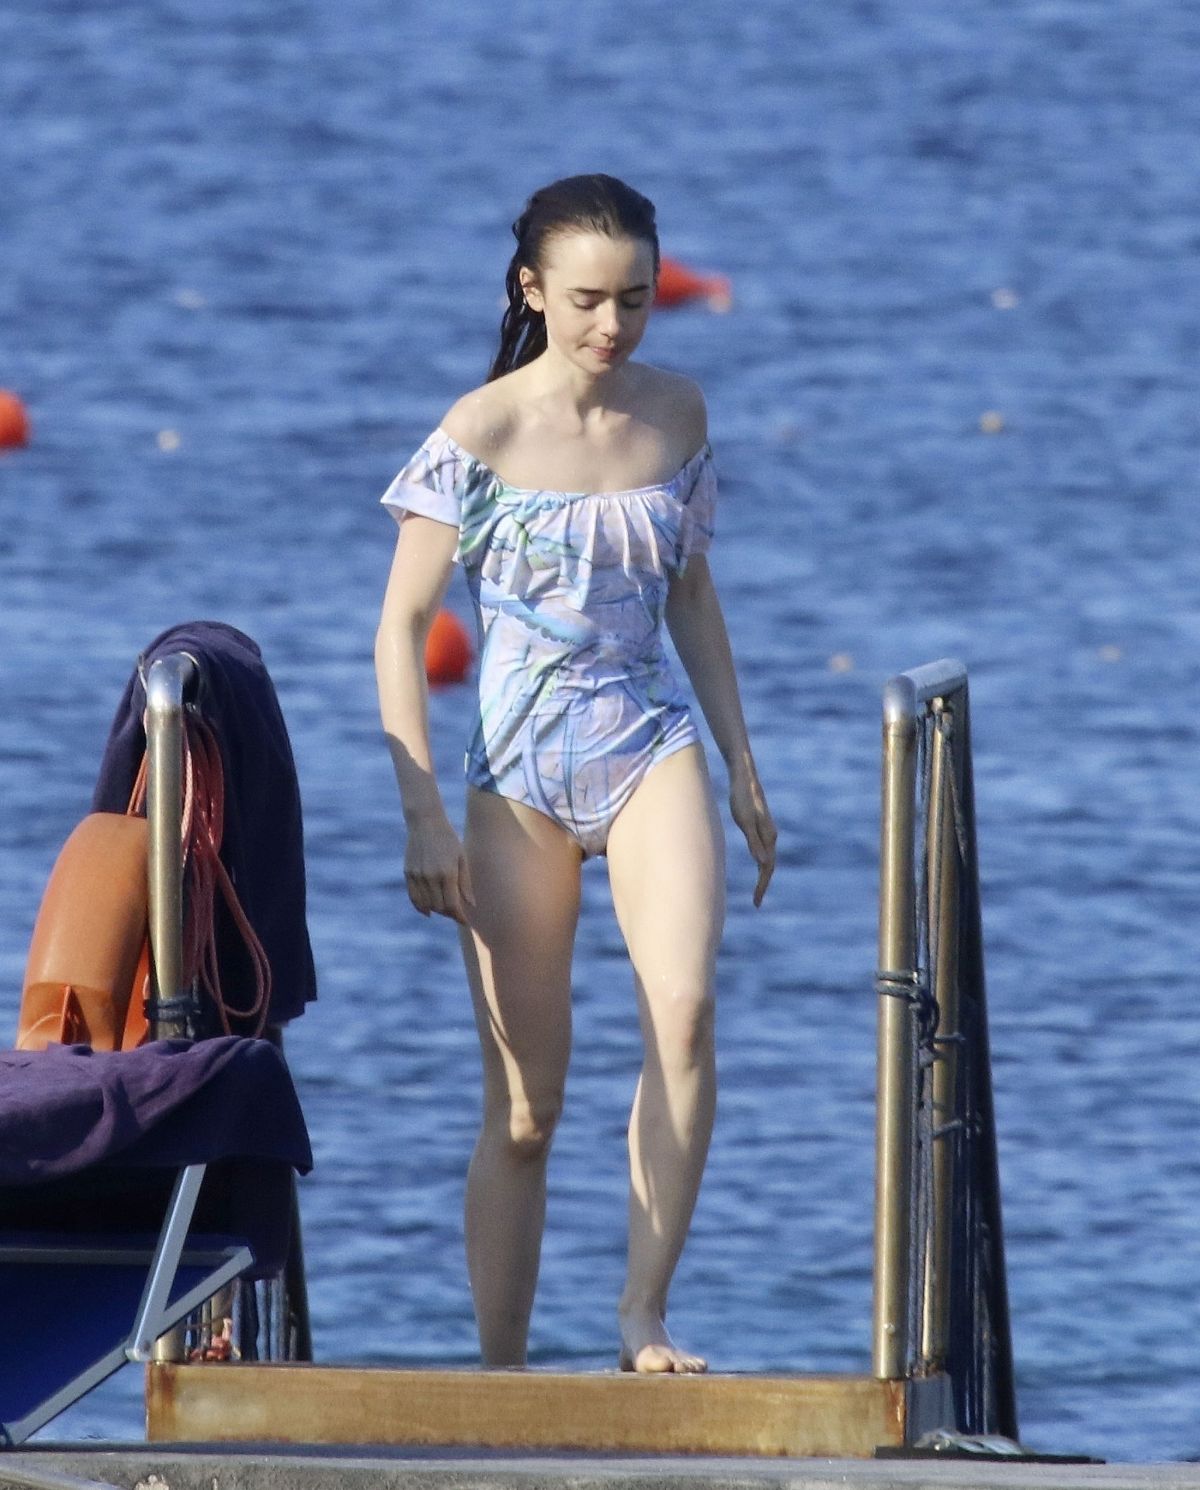 lily-collins-in-swimsuit-at-a-beach-in-ischia-07-18-2017_13.